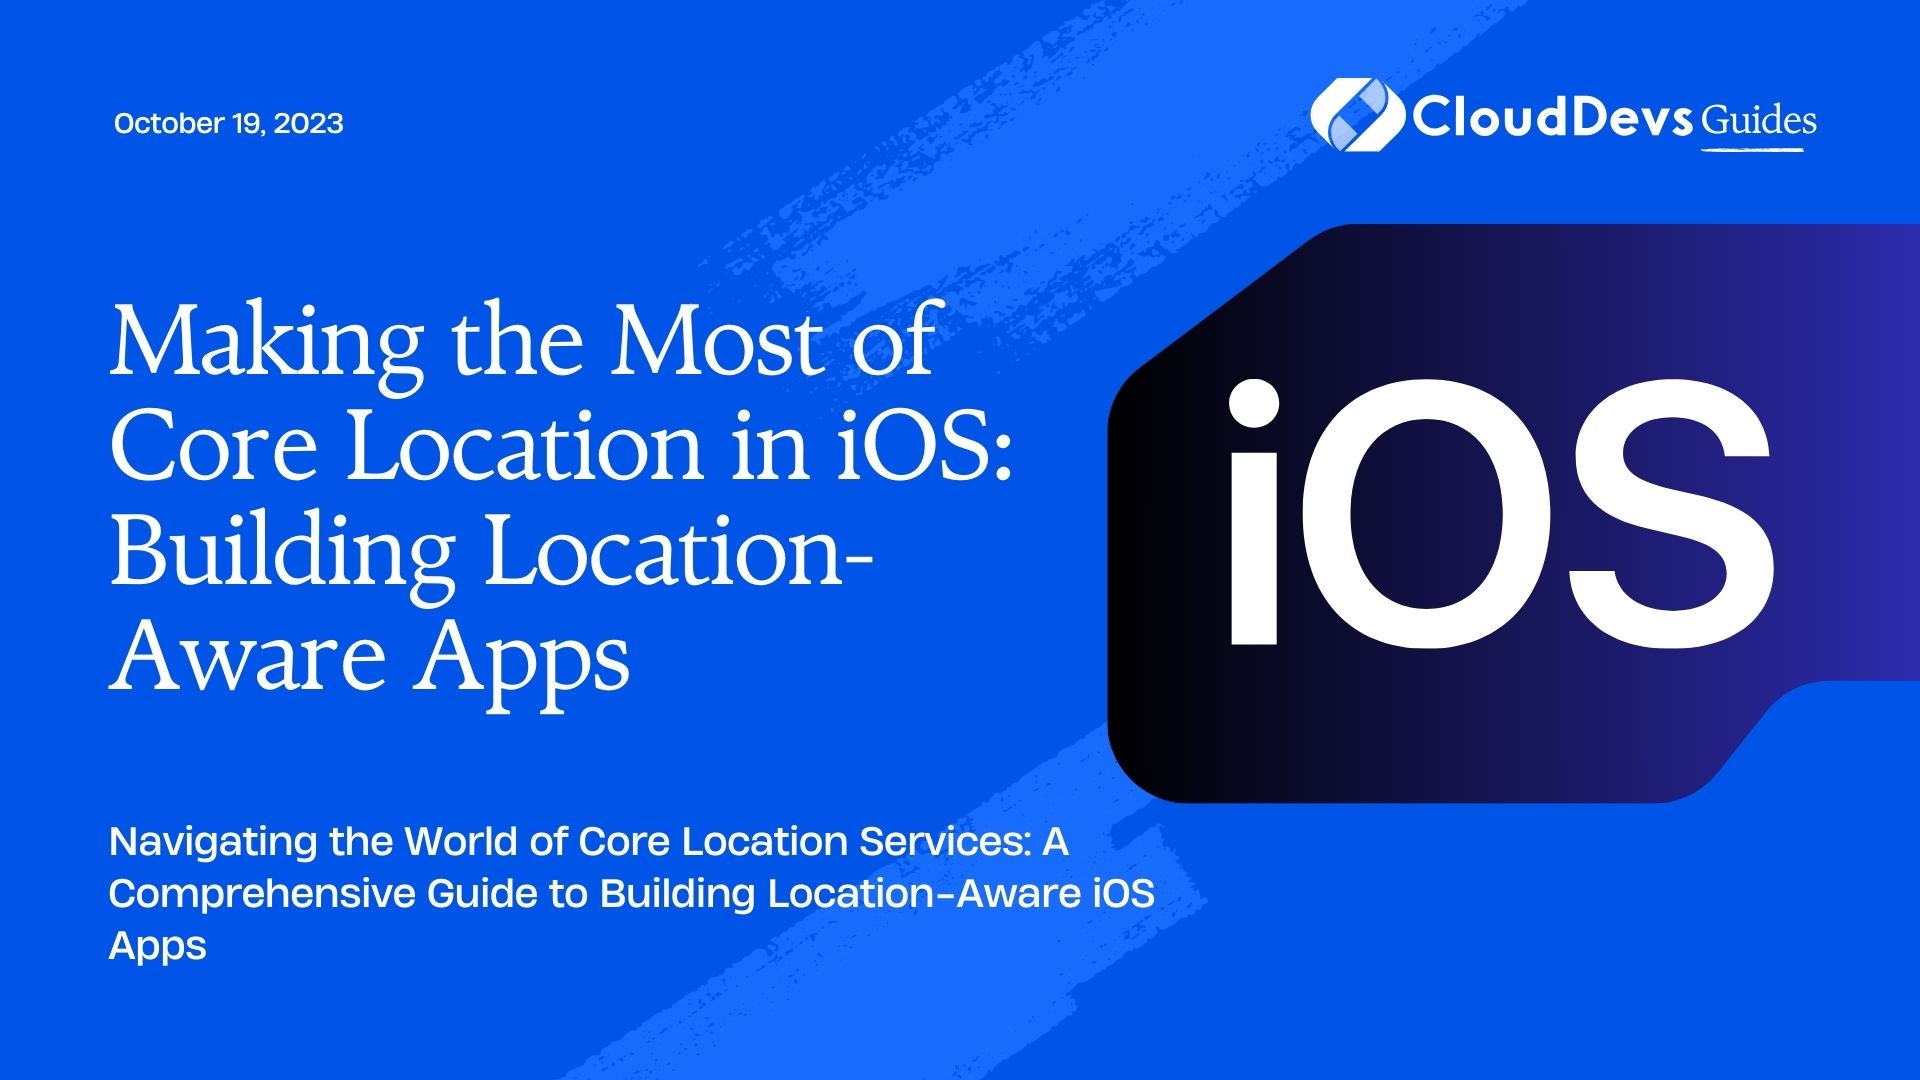 Making the Most of Core Location in iOS: Building Location-Aware Apps